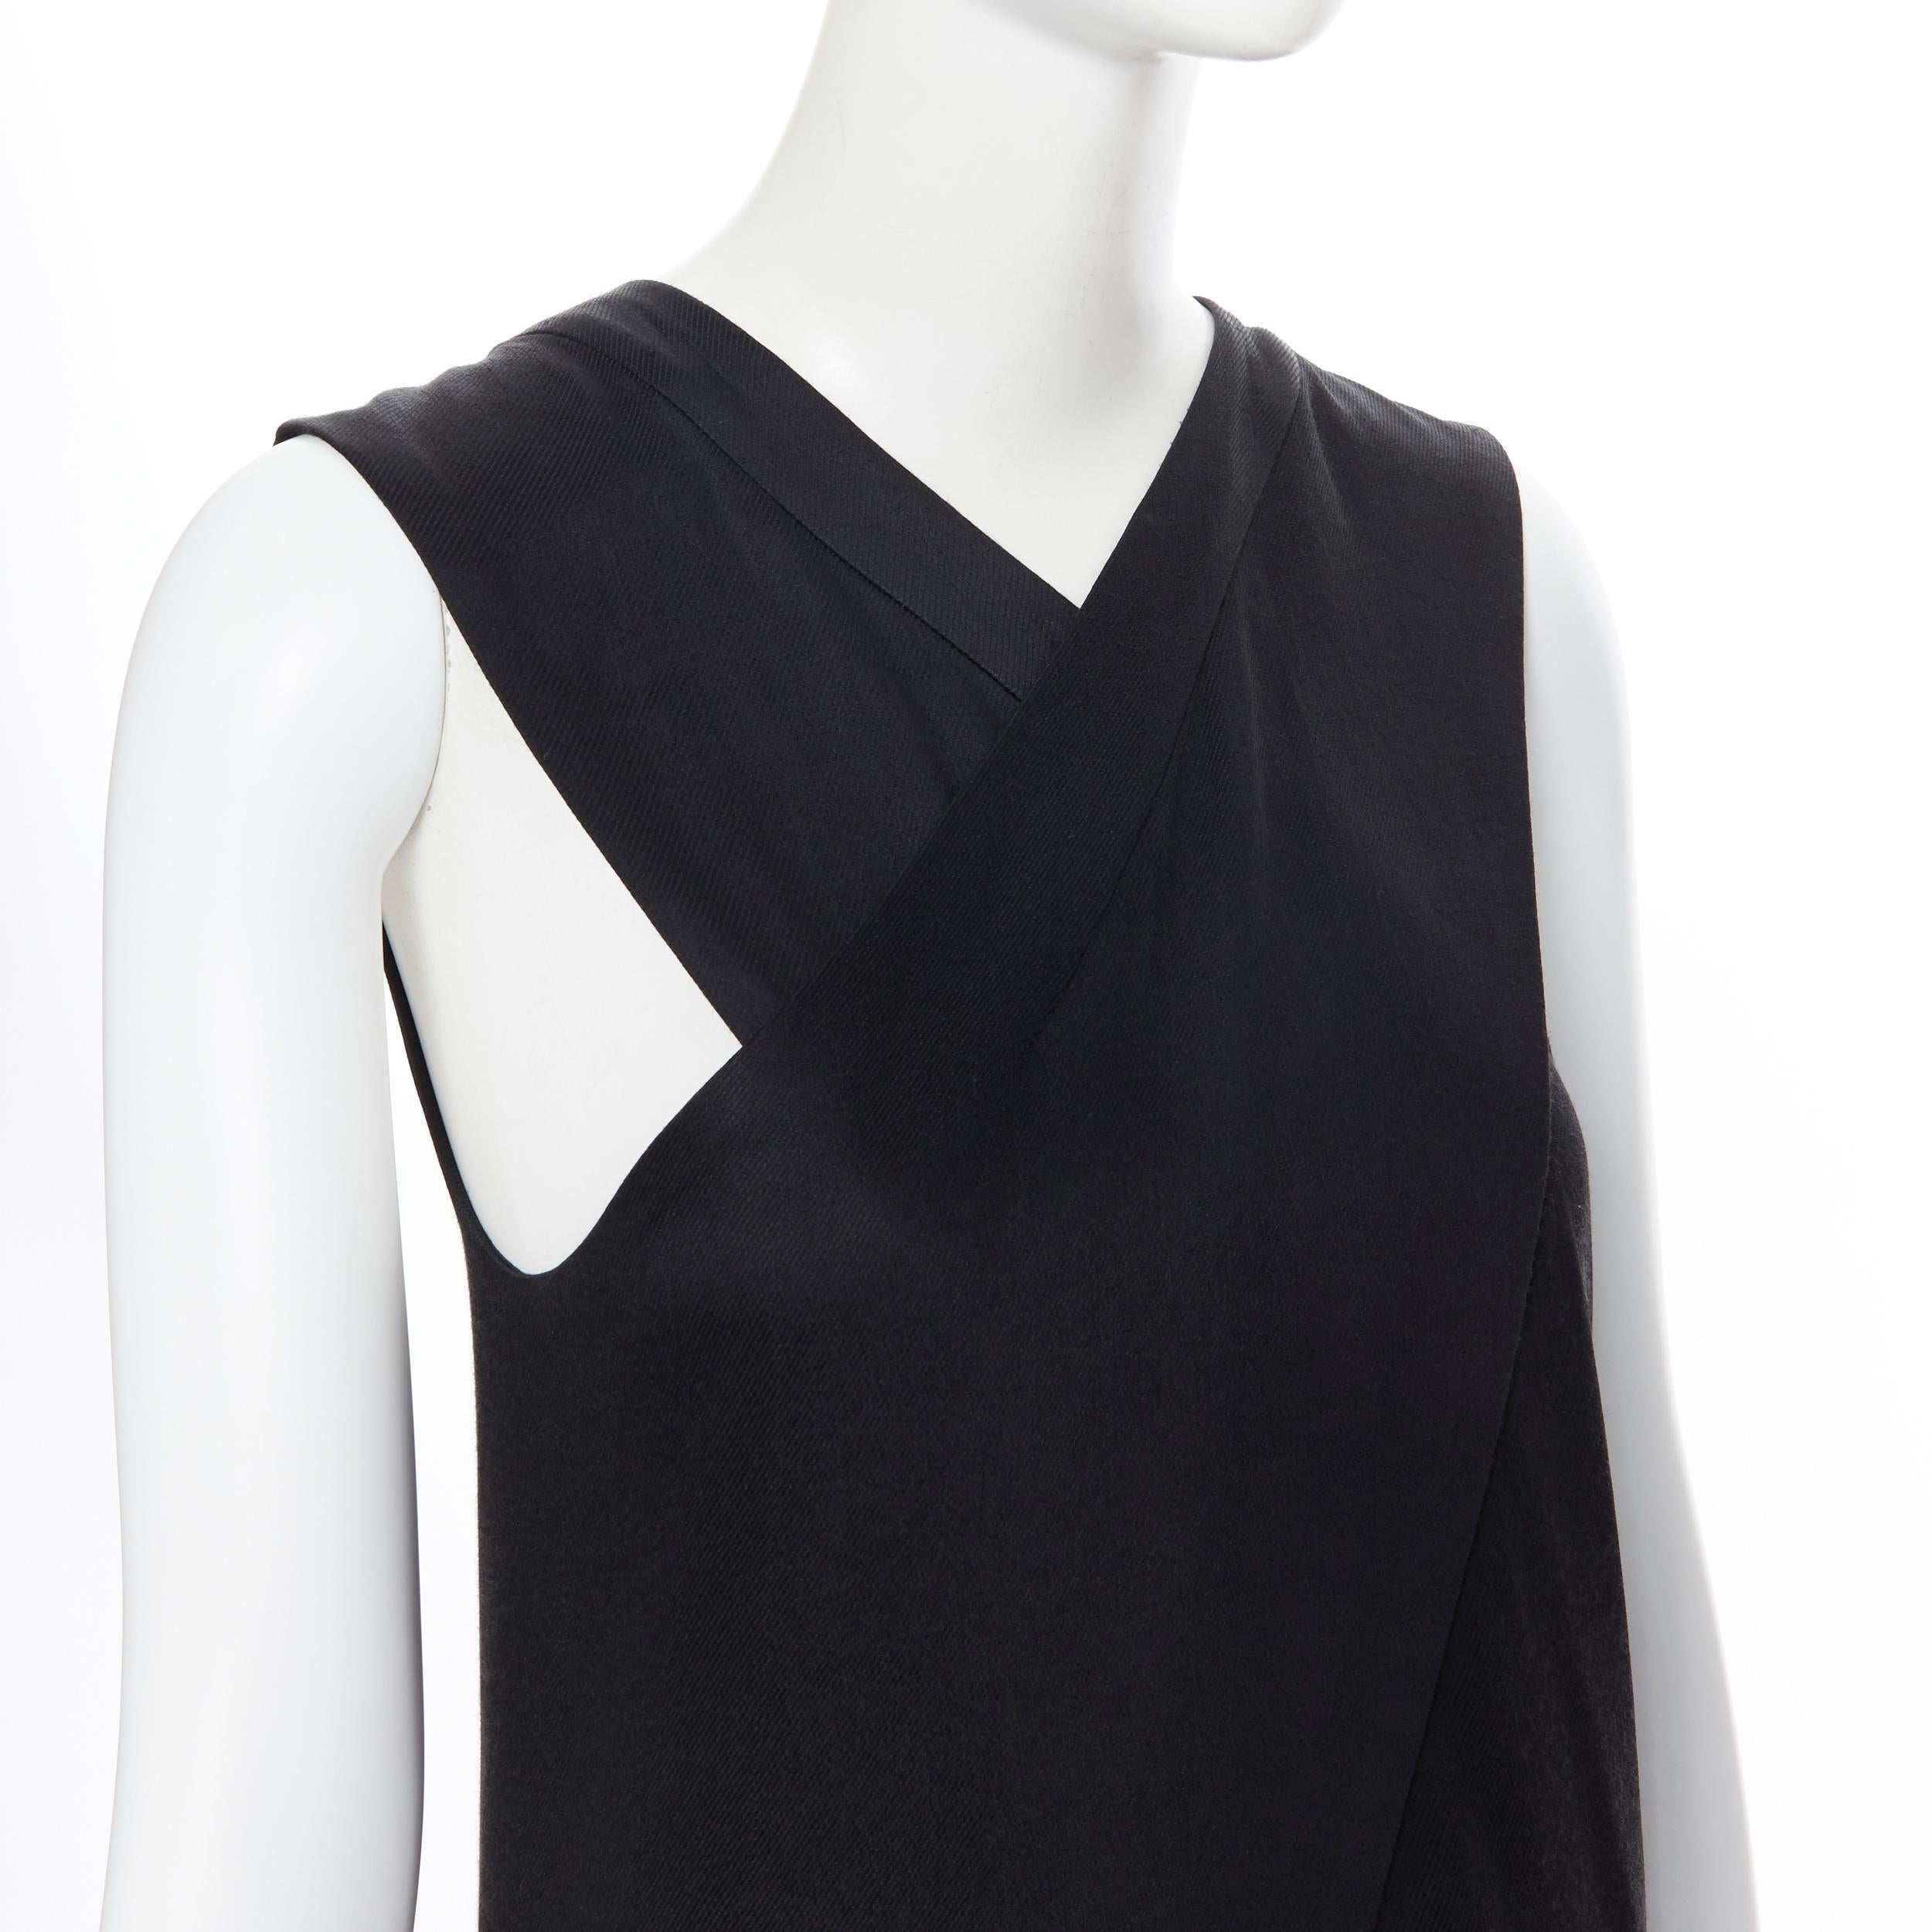 ROSETTA GETTY crossover front tail slit back sleeveless tunic top US2 XS
Brand: Rosetta Getty
Designer: Rosetta Getty
Model Name / Style: Crossover long top
Material: Viscose blend
Color: Black
Pattern: Solid
Extra Detail: Crossover front. Slit tail